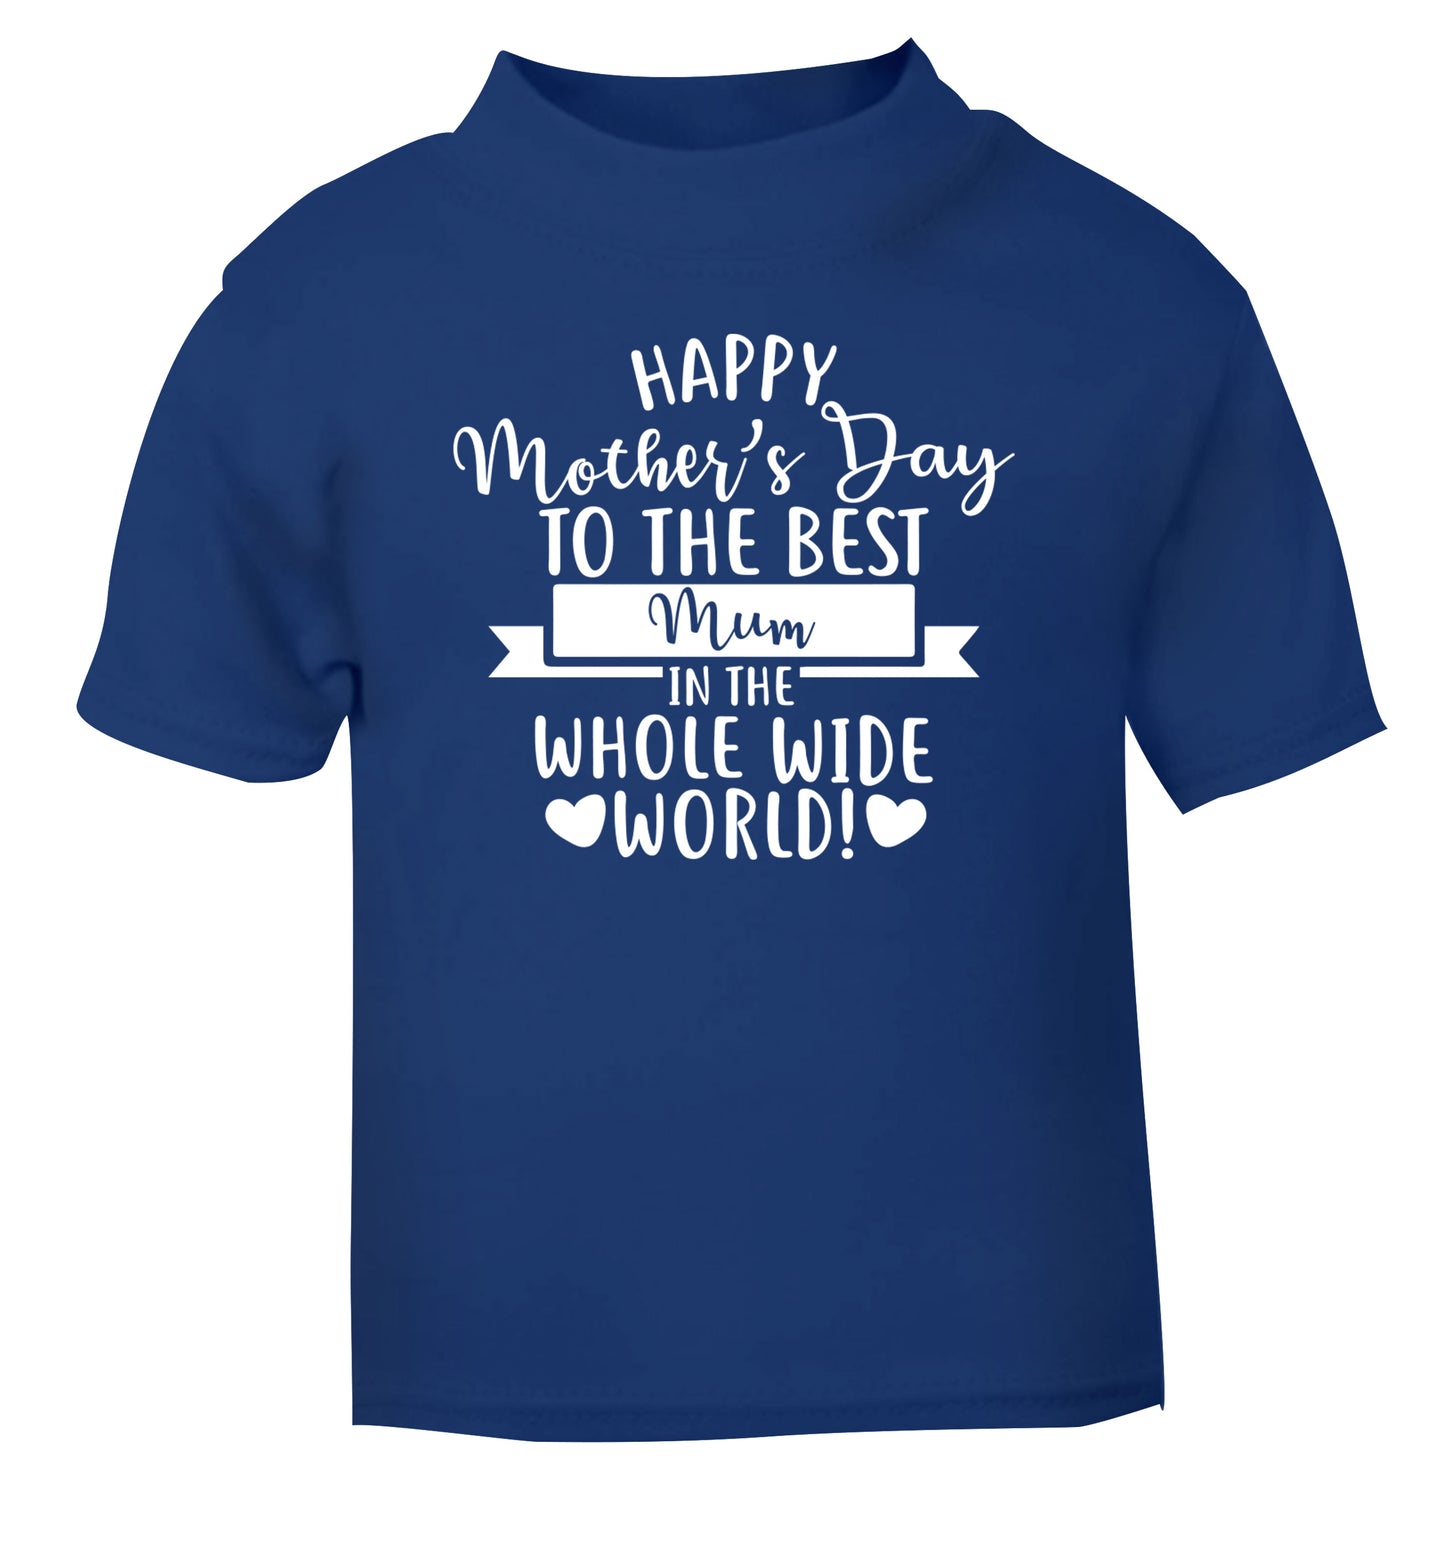 Happy Mother's Day to the best mum in the whole wide world! blue Baby Toddler Tshirt 2 Years